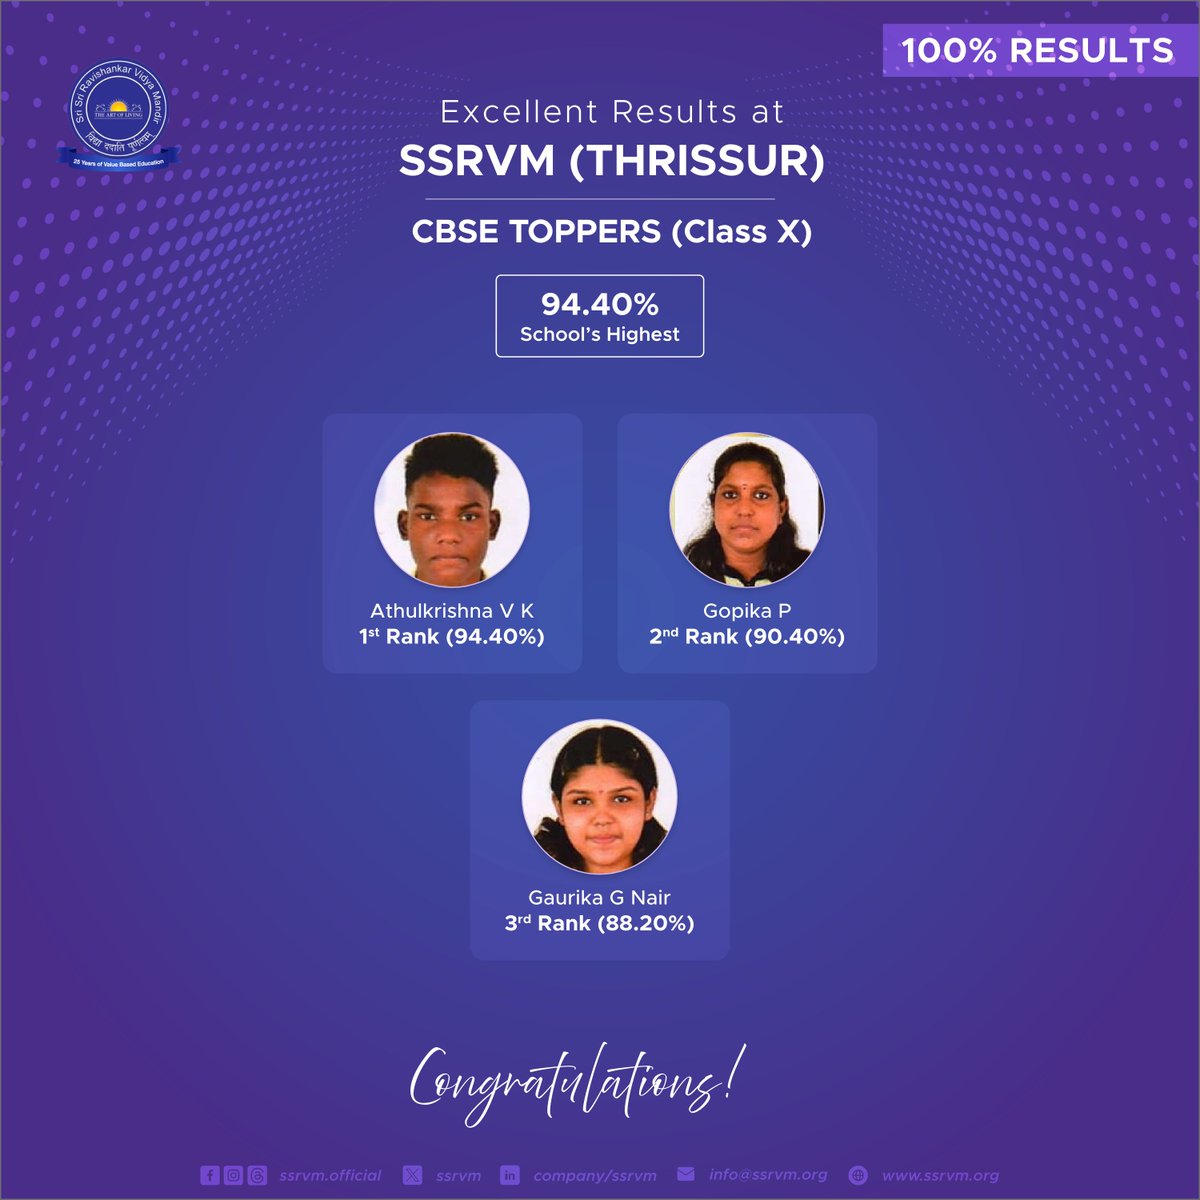 Congratulations to the students and faculty of Class X, SSRVM (Thrissur) for their remarkable achievement in the board exams. Your hard work and dedication have paid off. Keep up the good work! The highest score achieved is – 94.4%. #EducationMatters #SSRVM #Results #CBSEResults